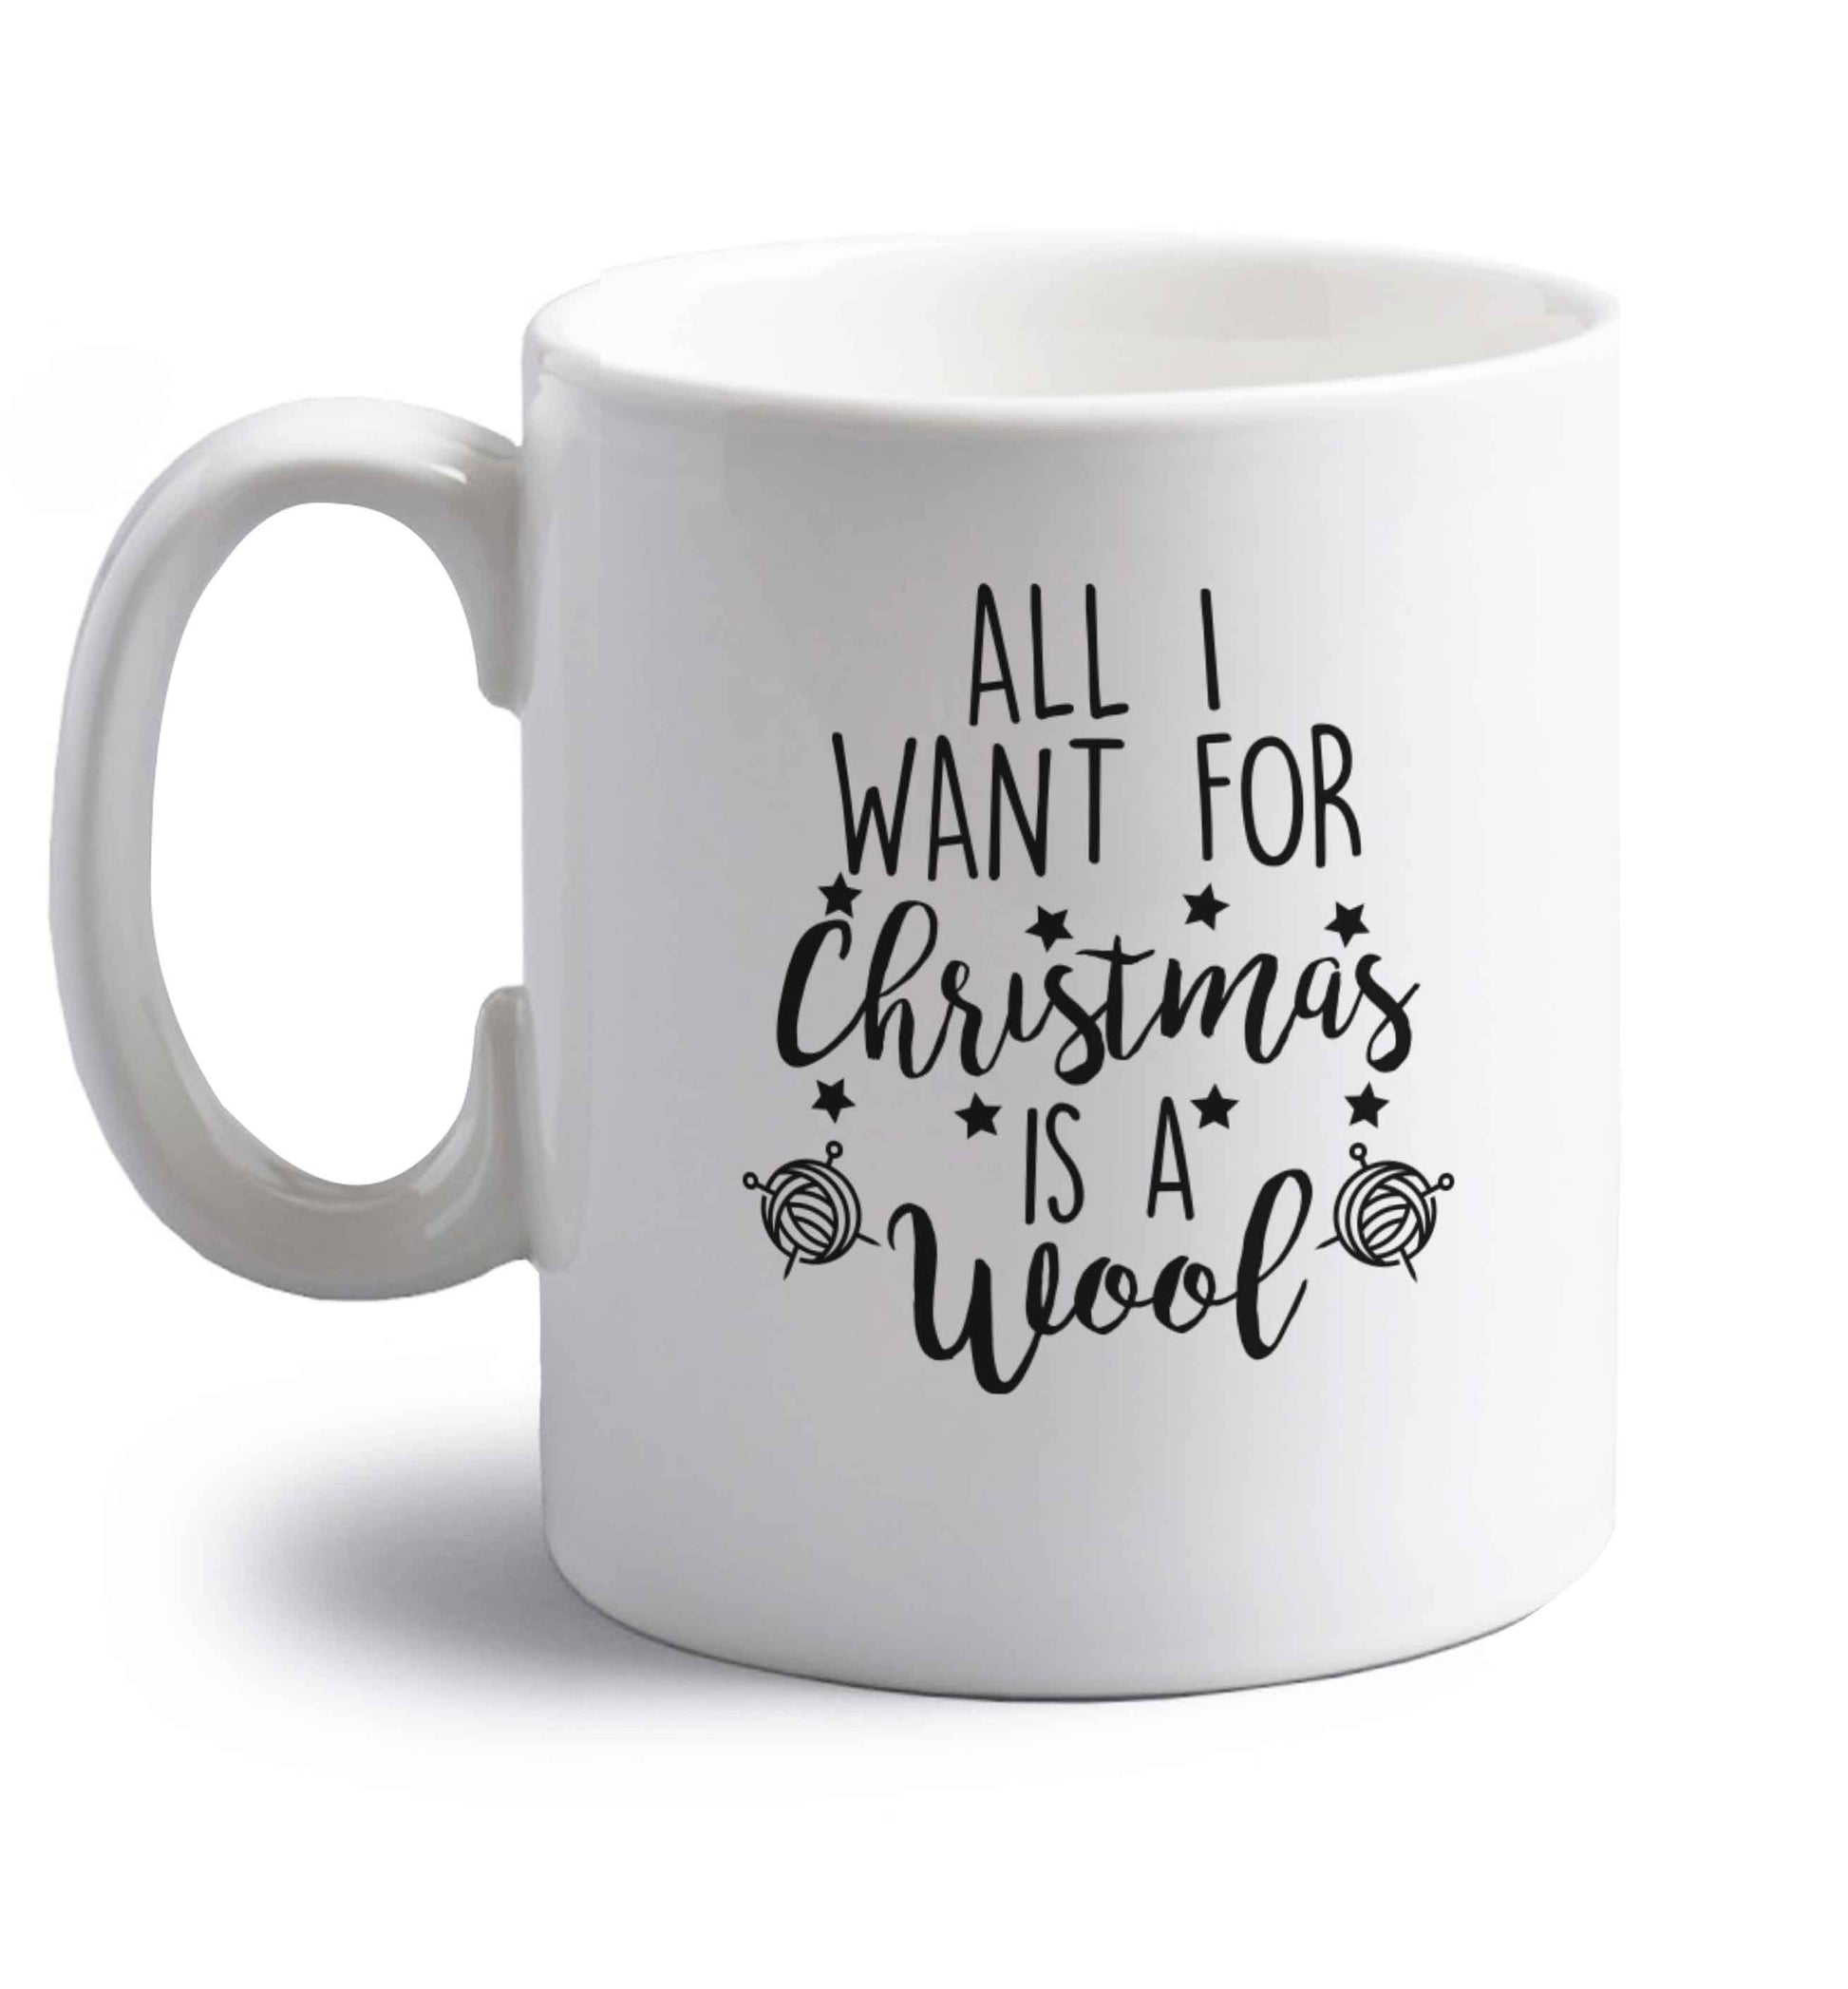 All I want for Christmas is wool! right handed white ceramic mug 